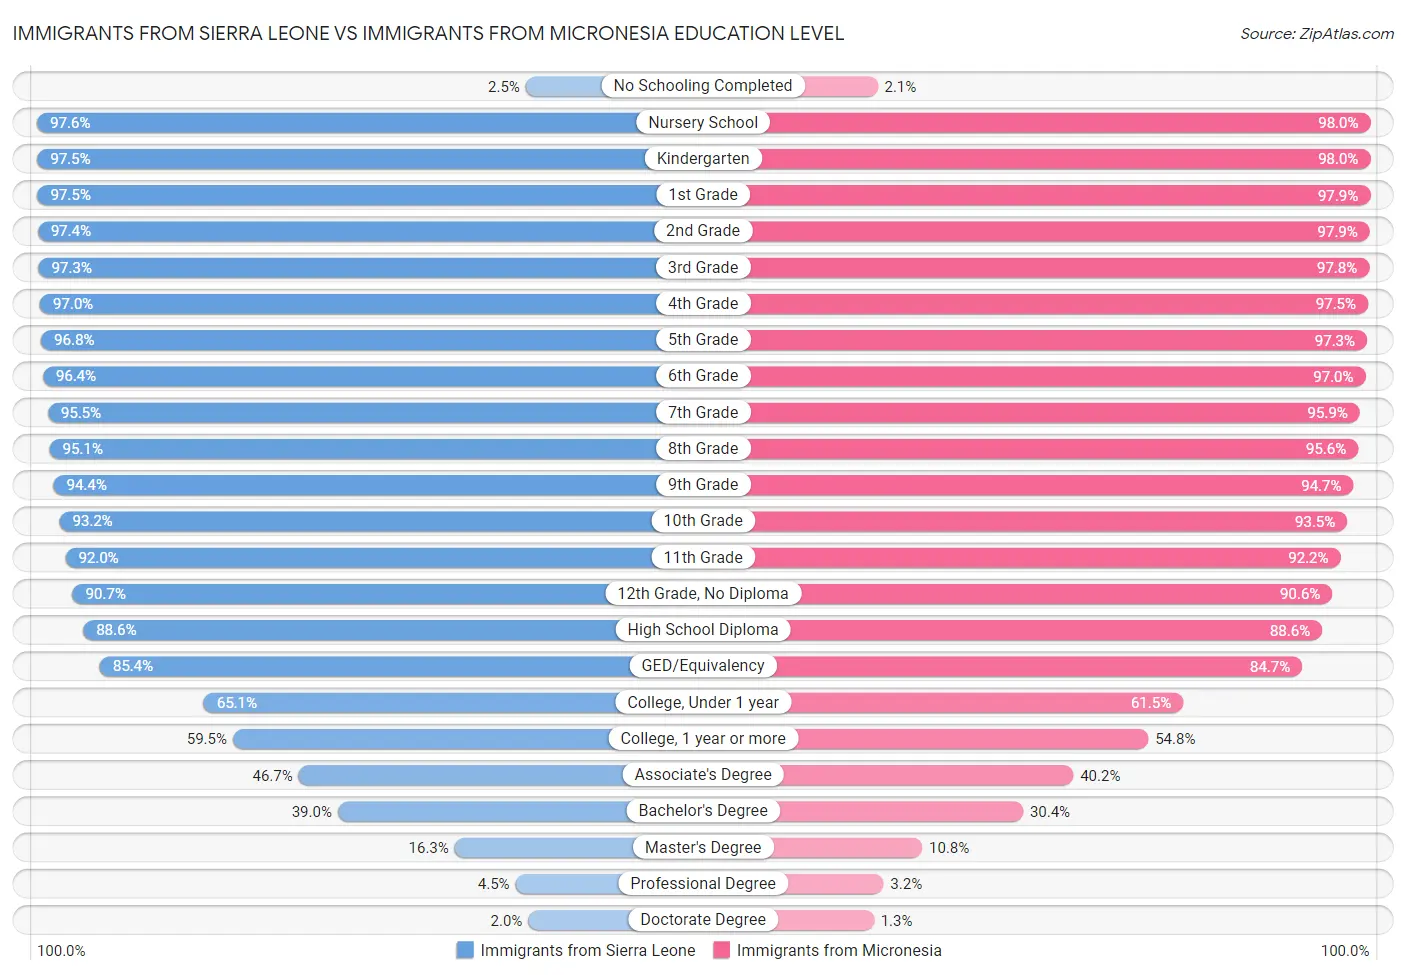 Immigrants from Sierra Leone vs Immigrants from Micronesia Education Level